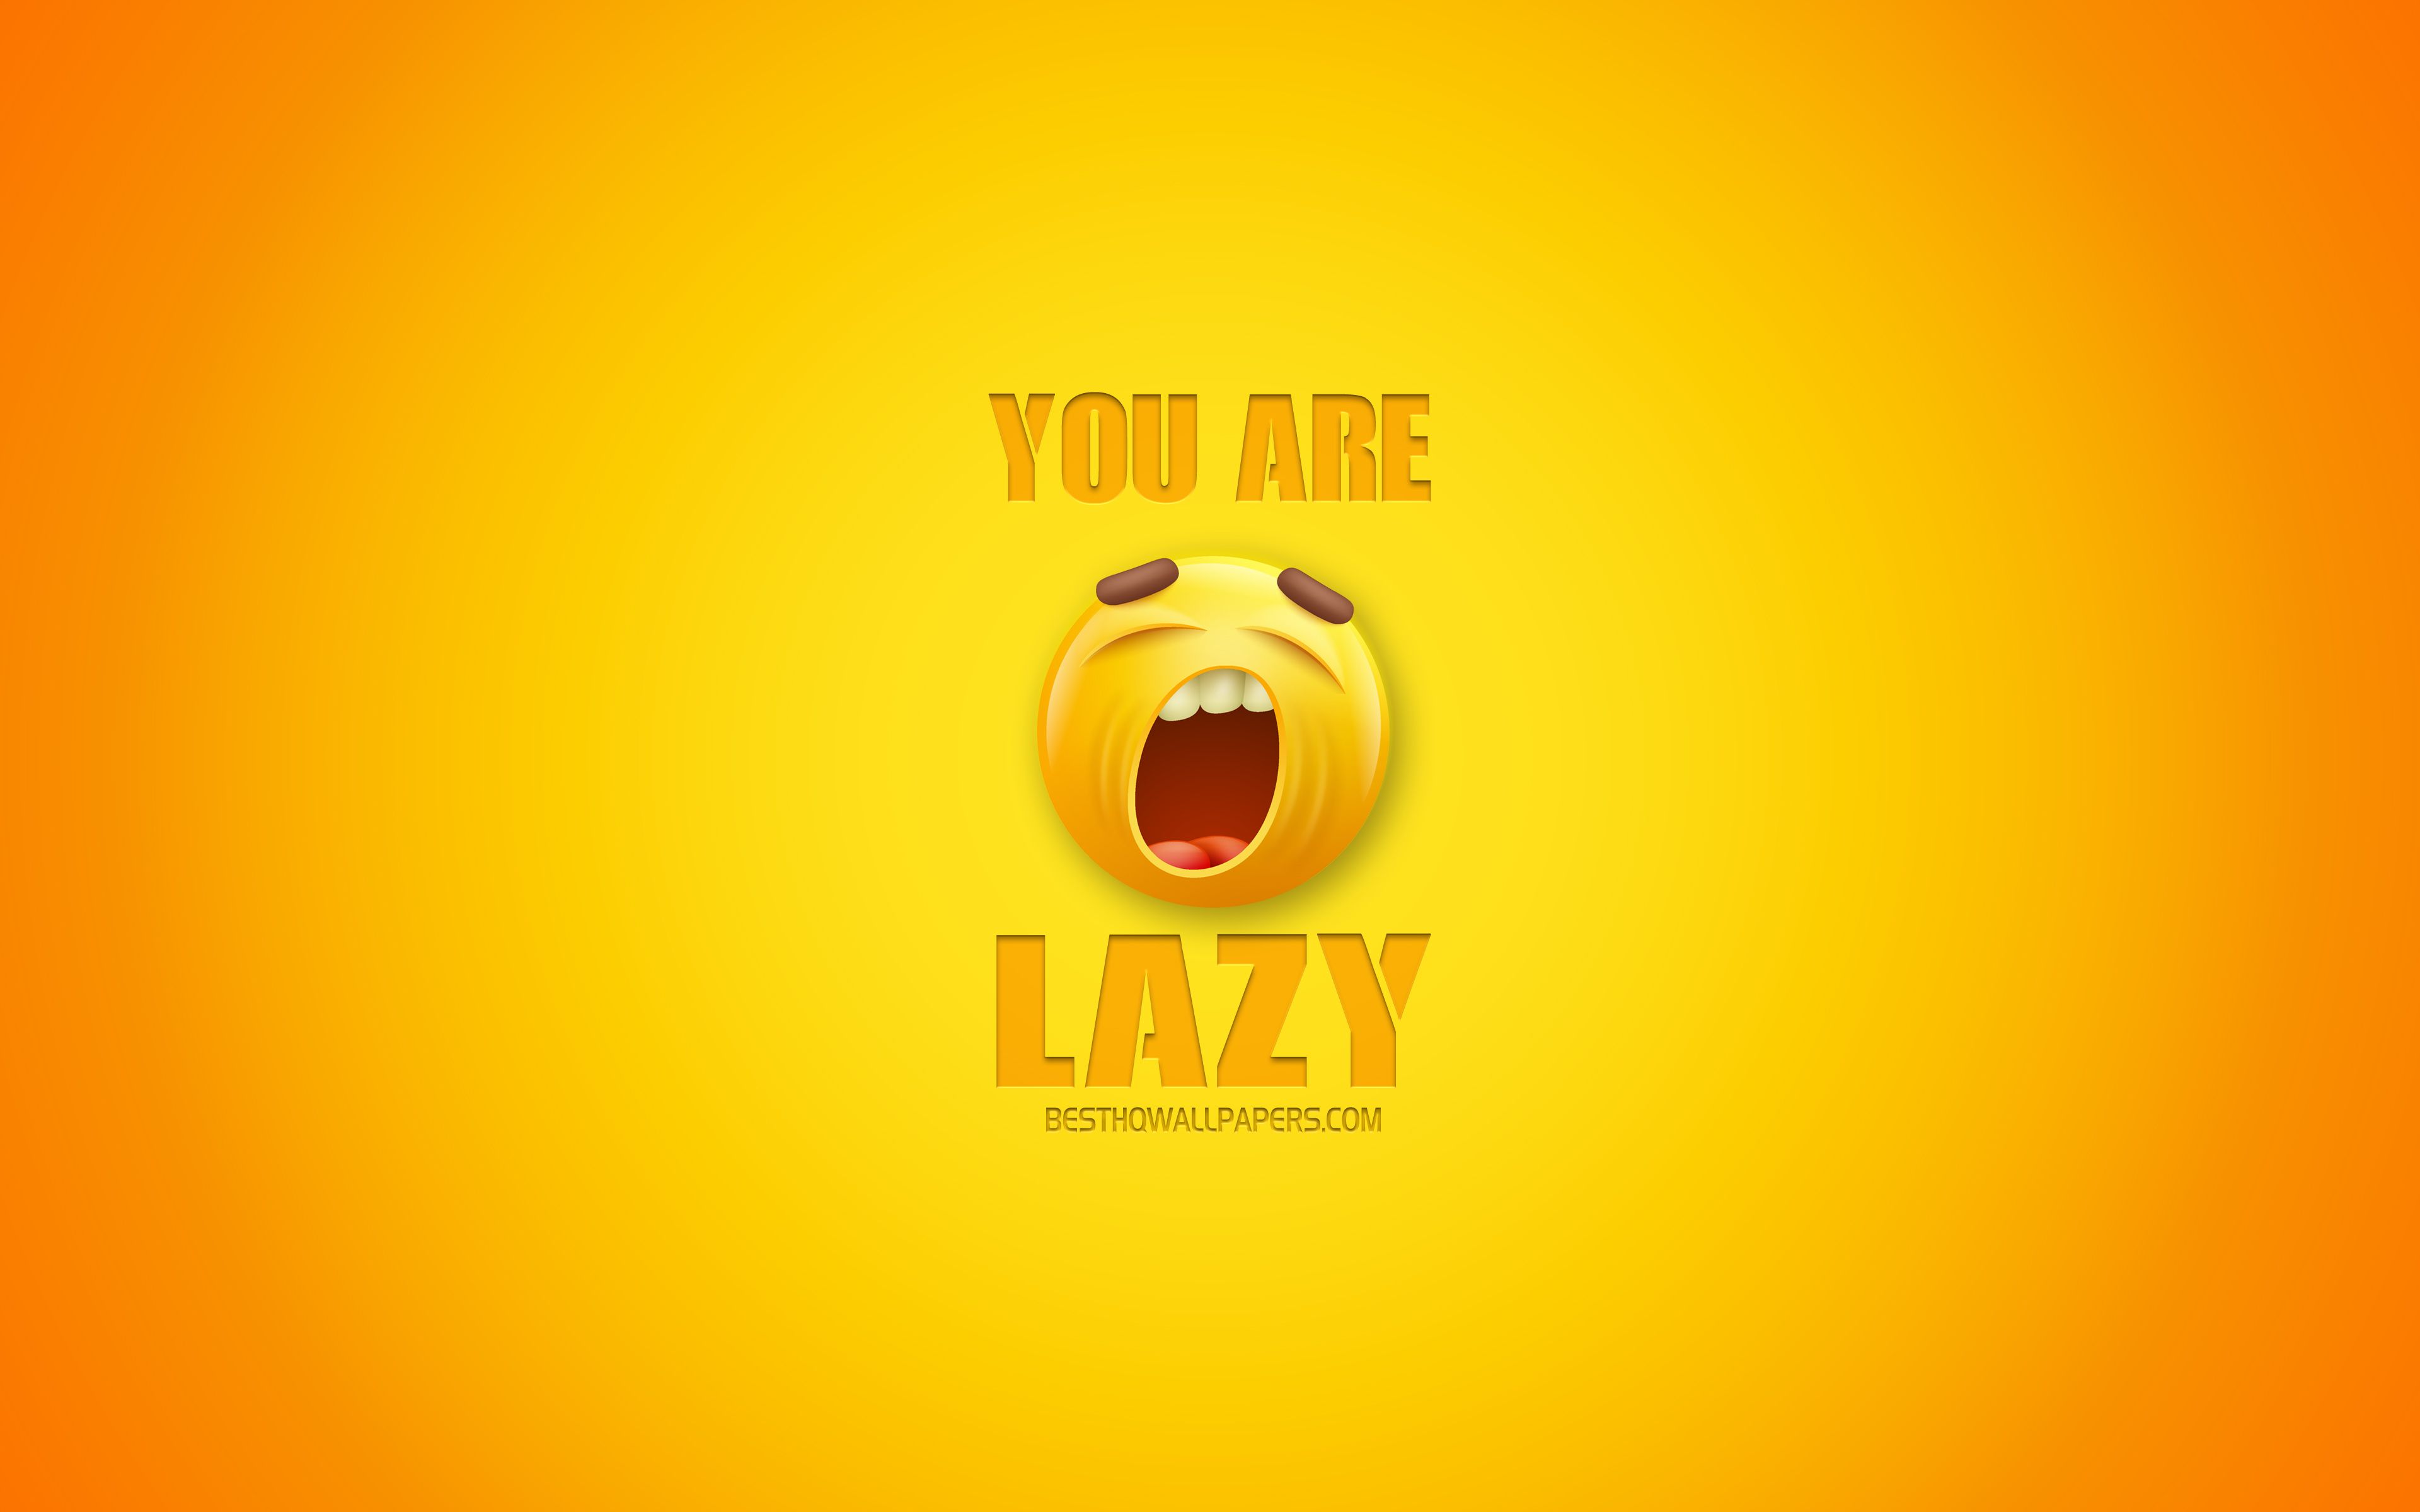 Download wallpaper You are lazy, funny art, yellow background, 3D